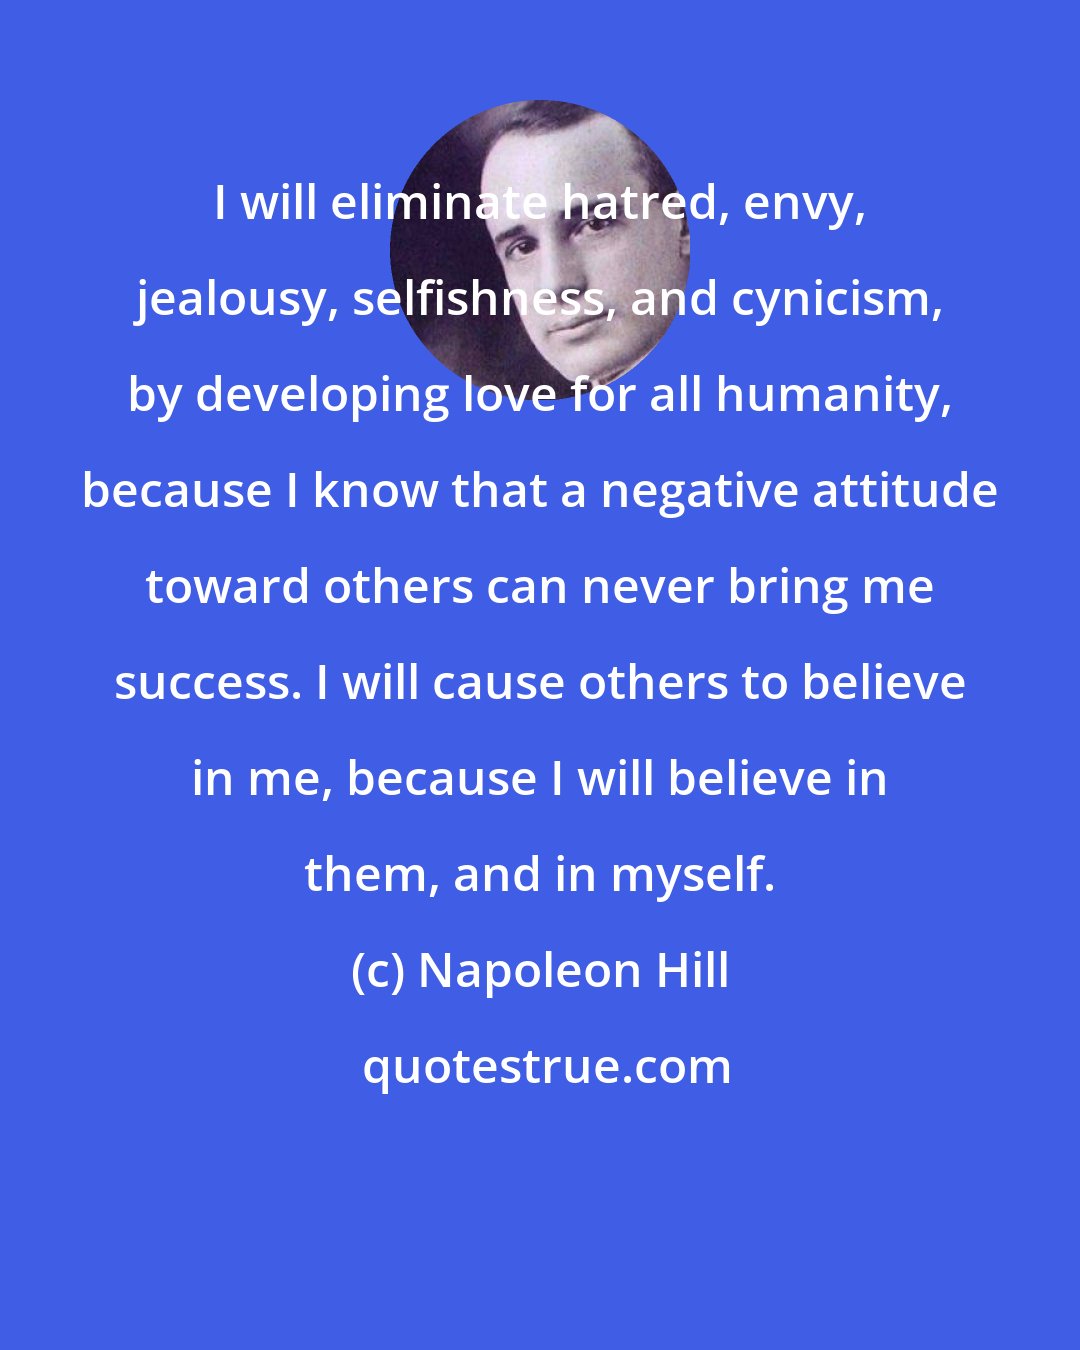 Napoleon Hill: I will eliminate hatred, envy, jealousy, selfishness, and cynicism, by developing love for all humanity, because I know that a negative attitude toward others can never bring me success. I will cause others to believe in me, because I will believe in them, and in myself.